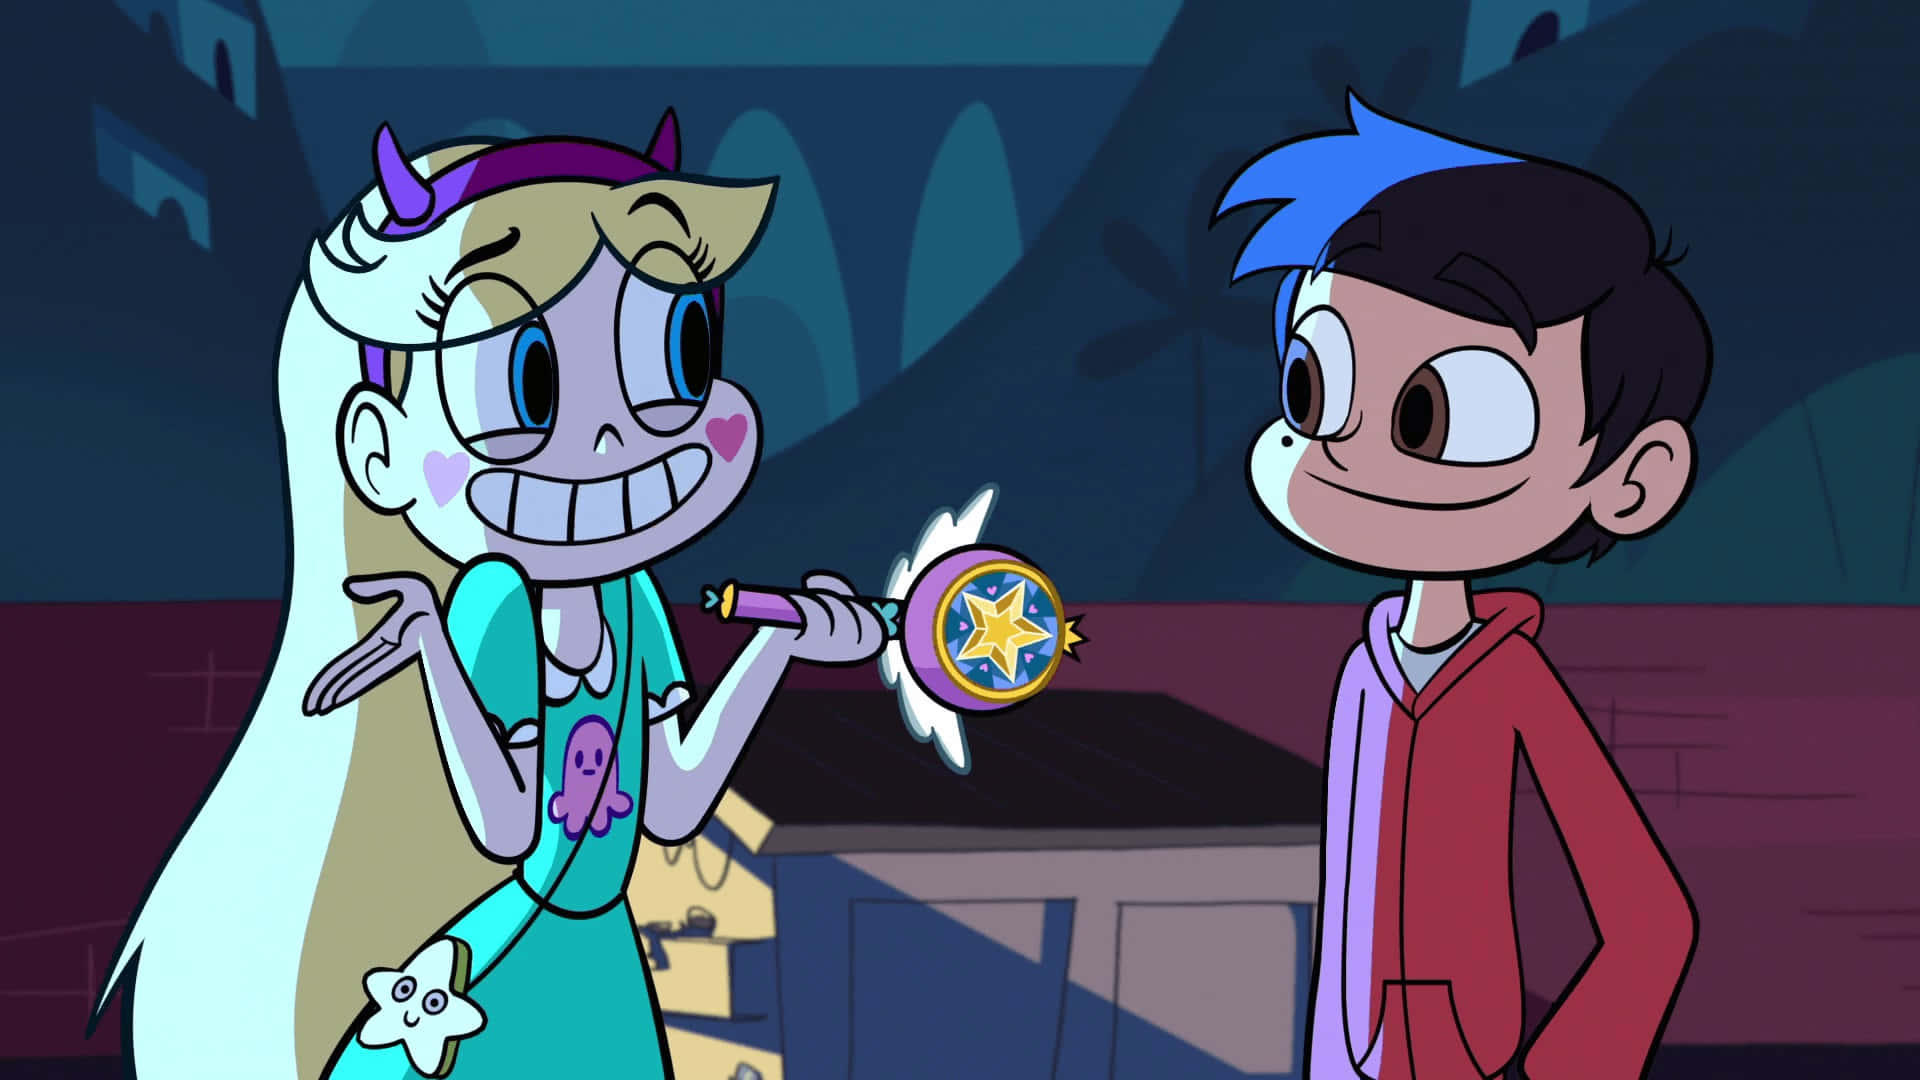 Star Vs. The Forces Of Evil Adventure in Mewni